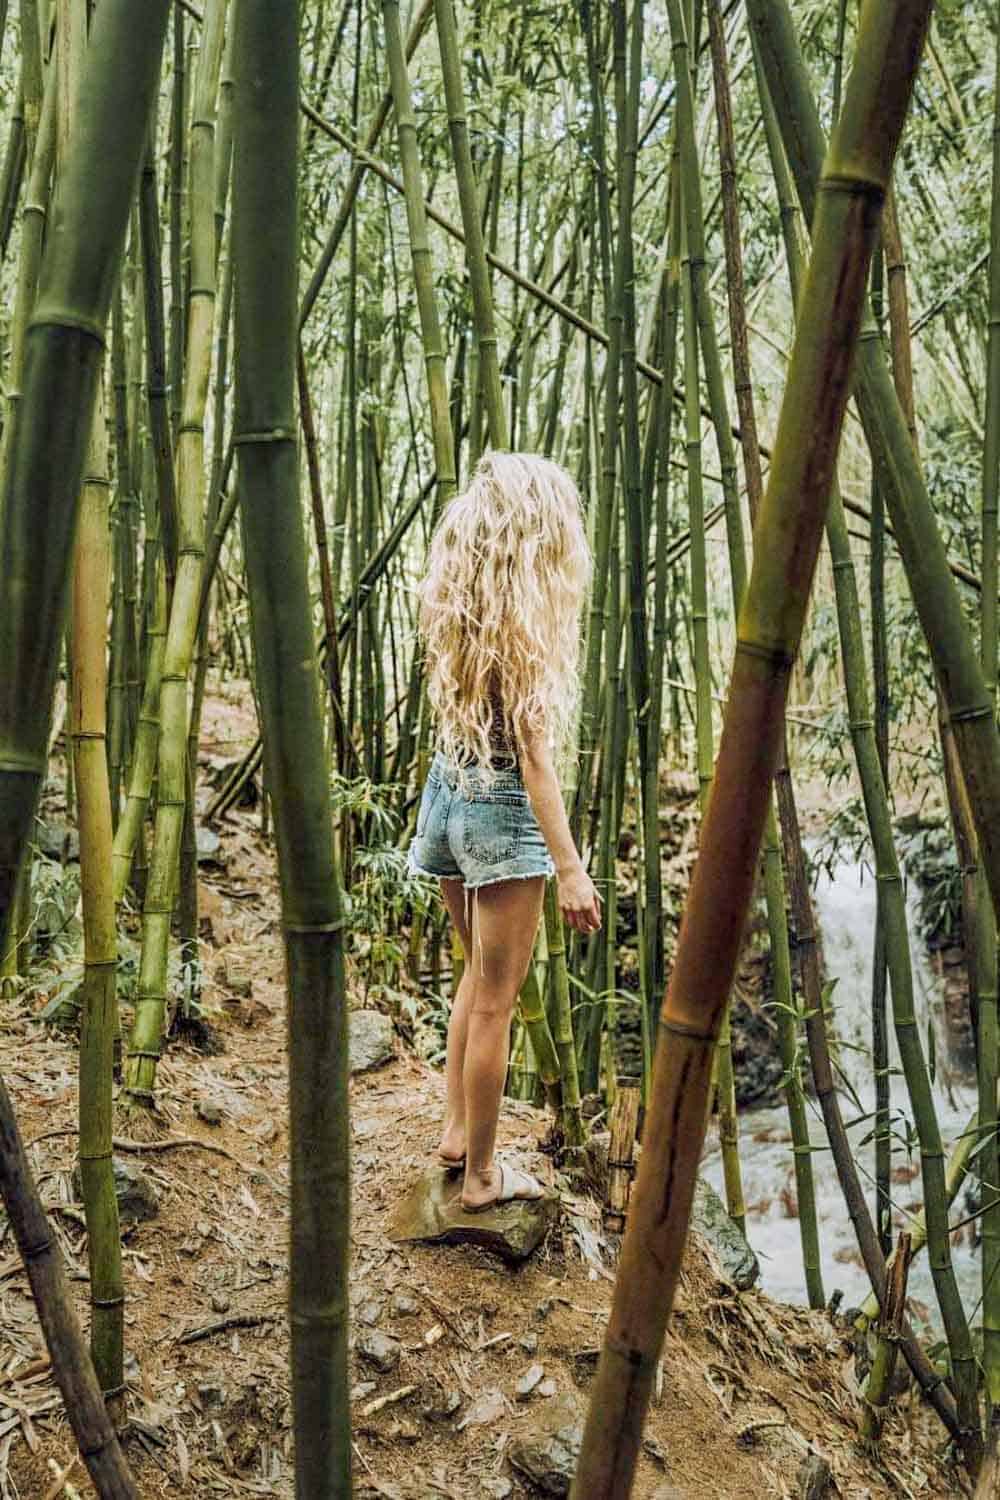 Bamboo forest in Maui Hawaii